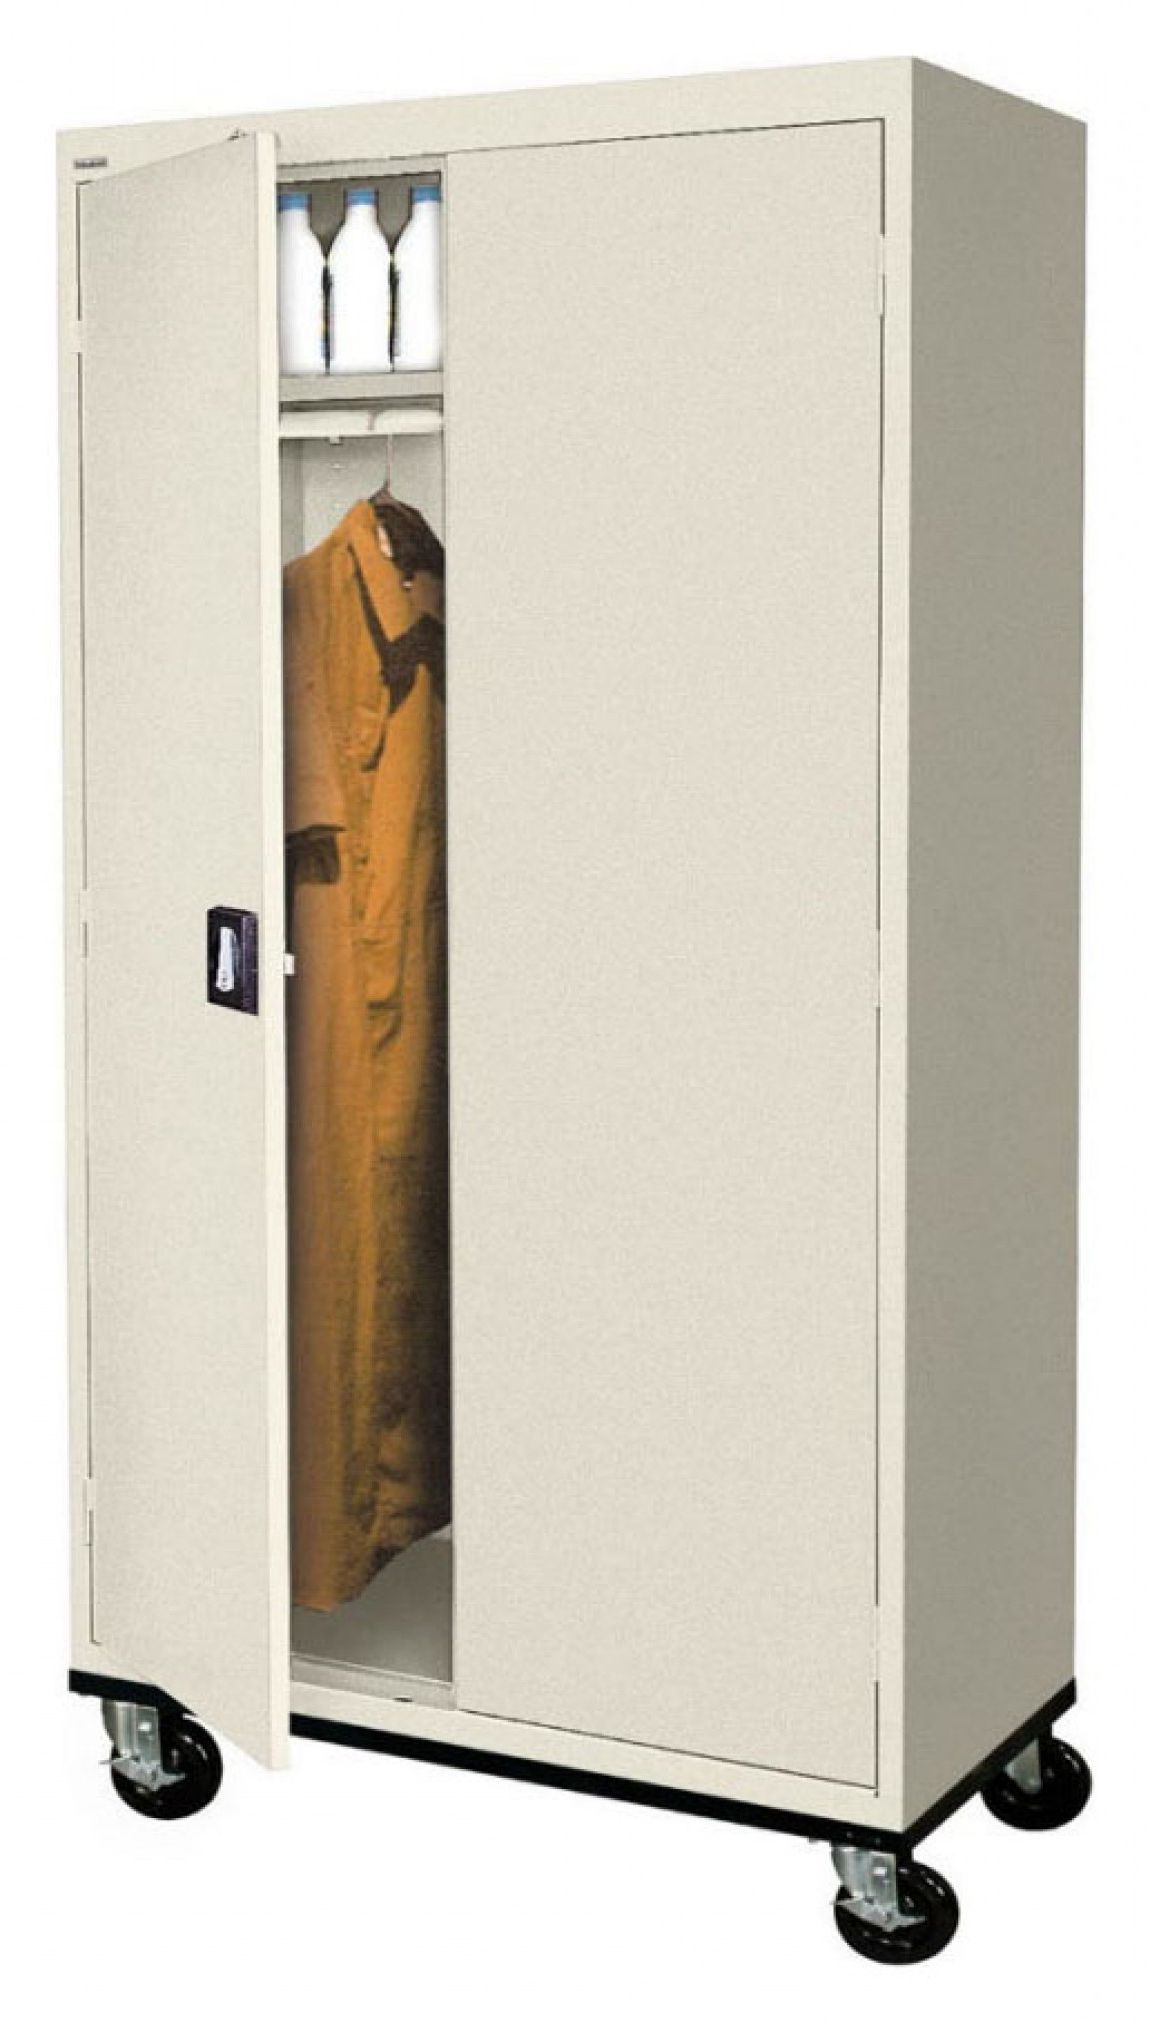 Putty Mobile Wardrobe Storage Cabinet 46" X 24" X 78" : Tawr462472    –  Mobile Transportsandusky | Madison Liquidators In Mobile Wardrobes Cabinets (View 6 of 20)